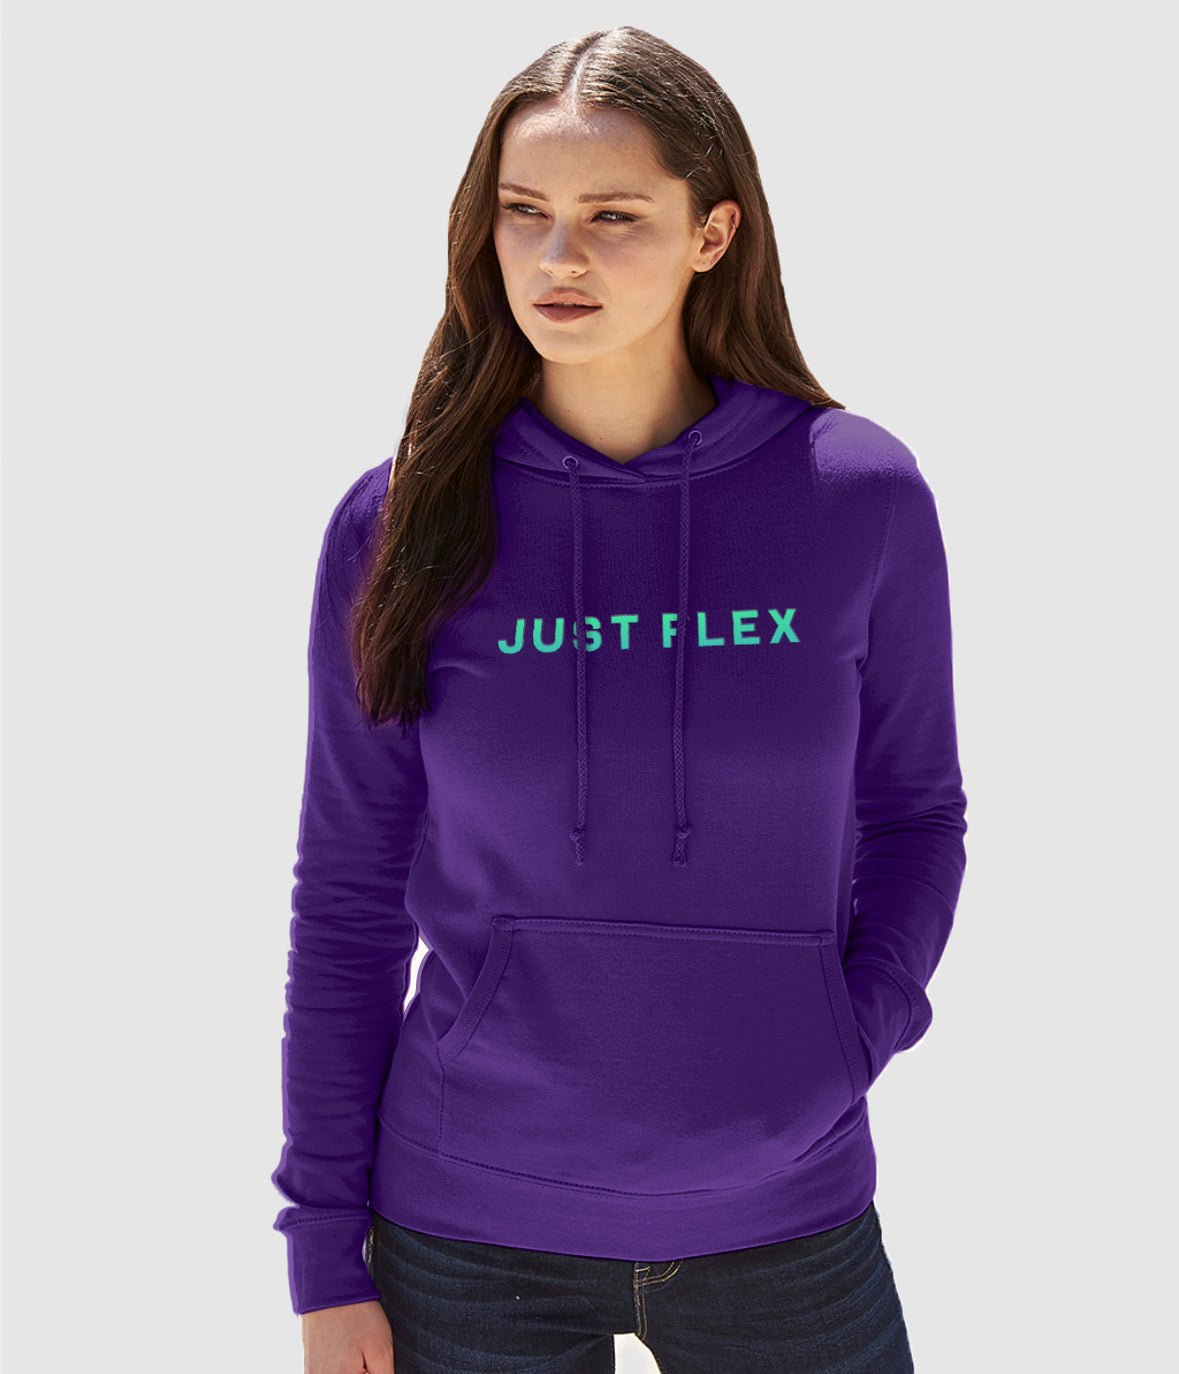 Just Flex: Stylish and Functional Activewear for Your Workouts